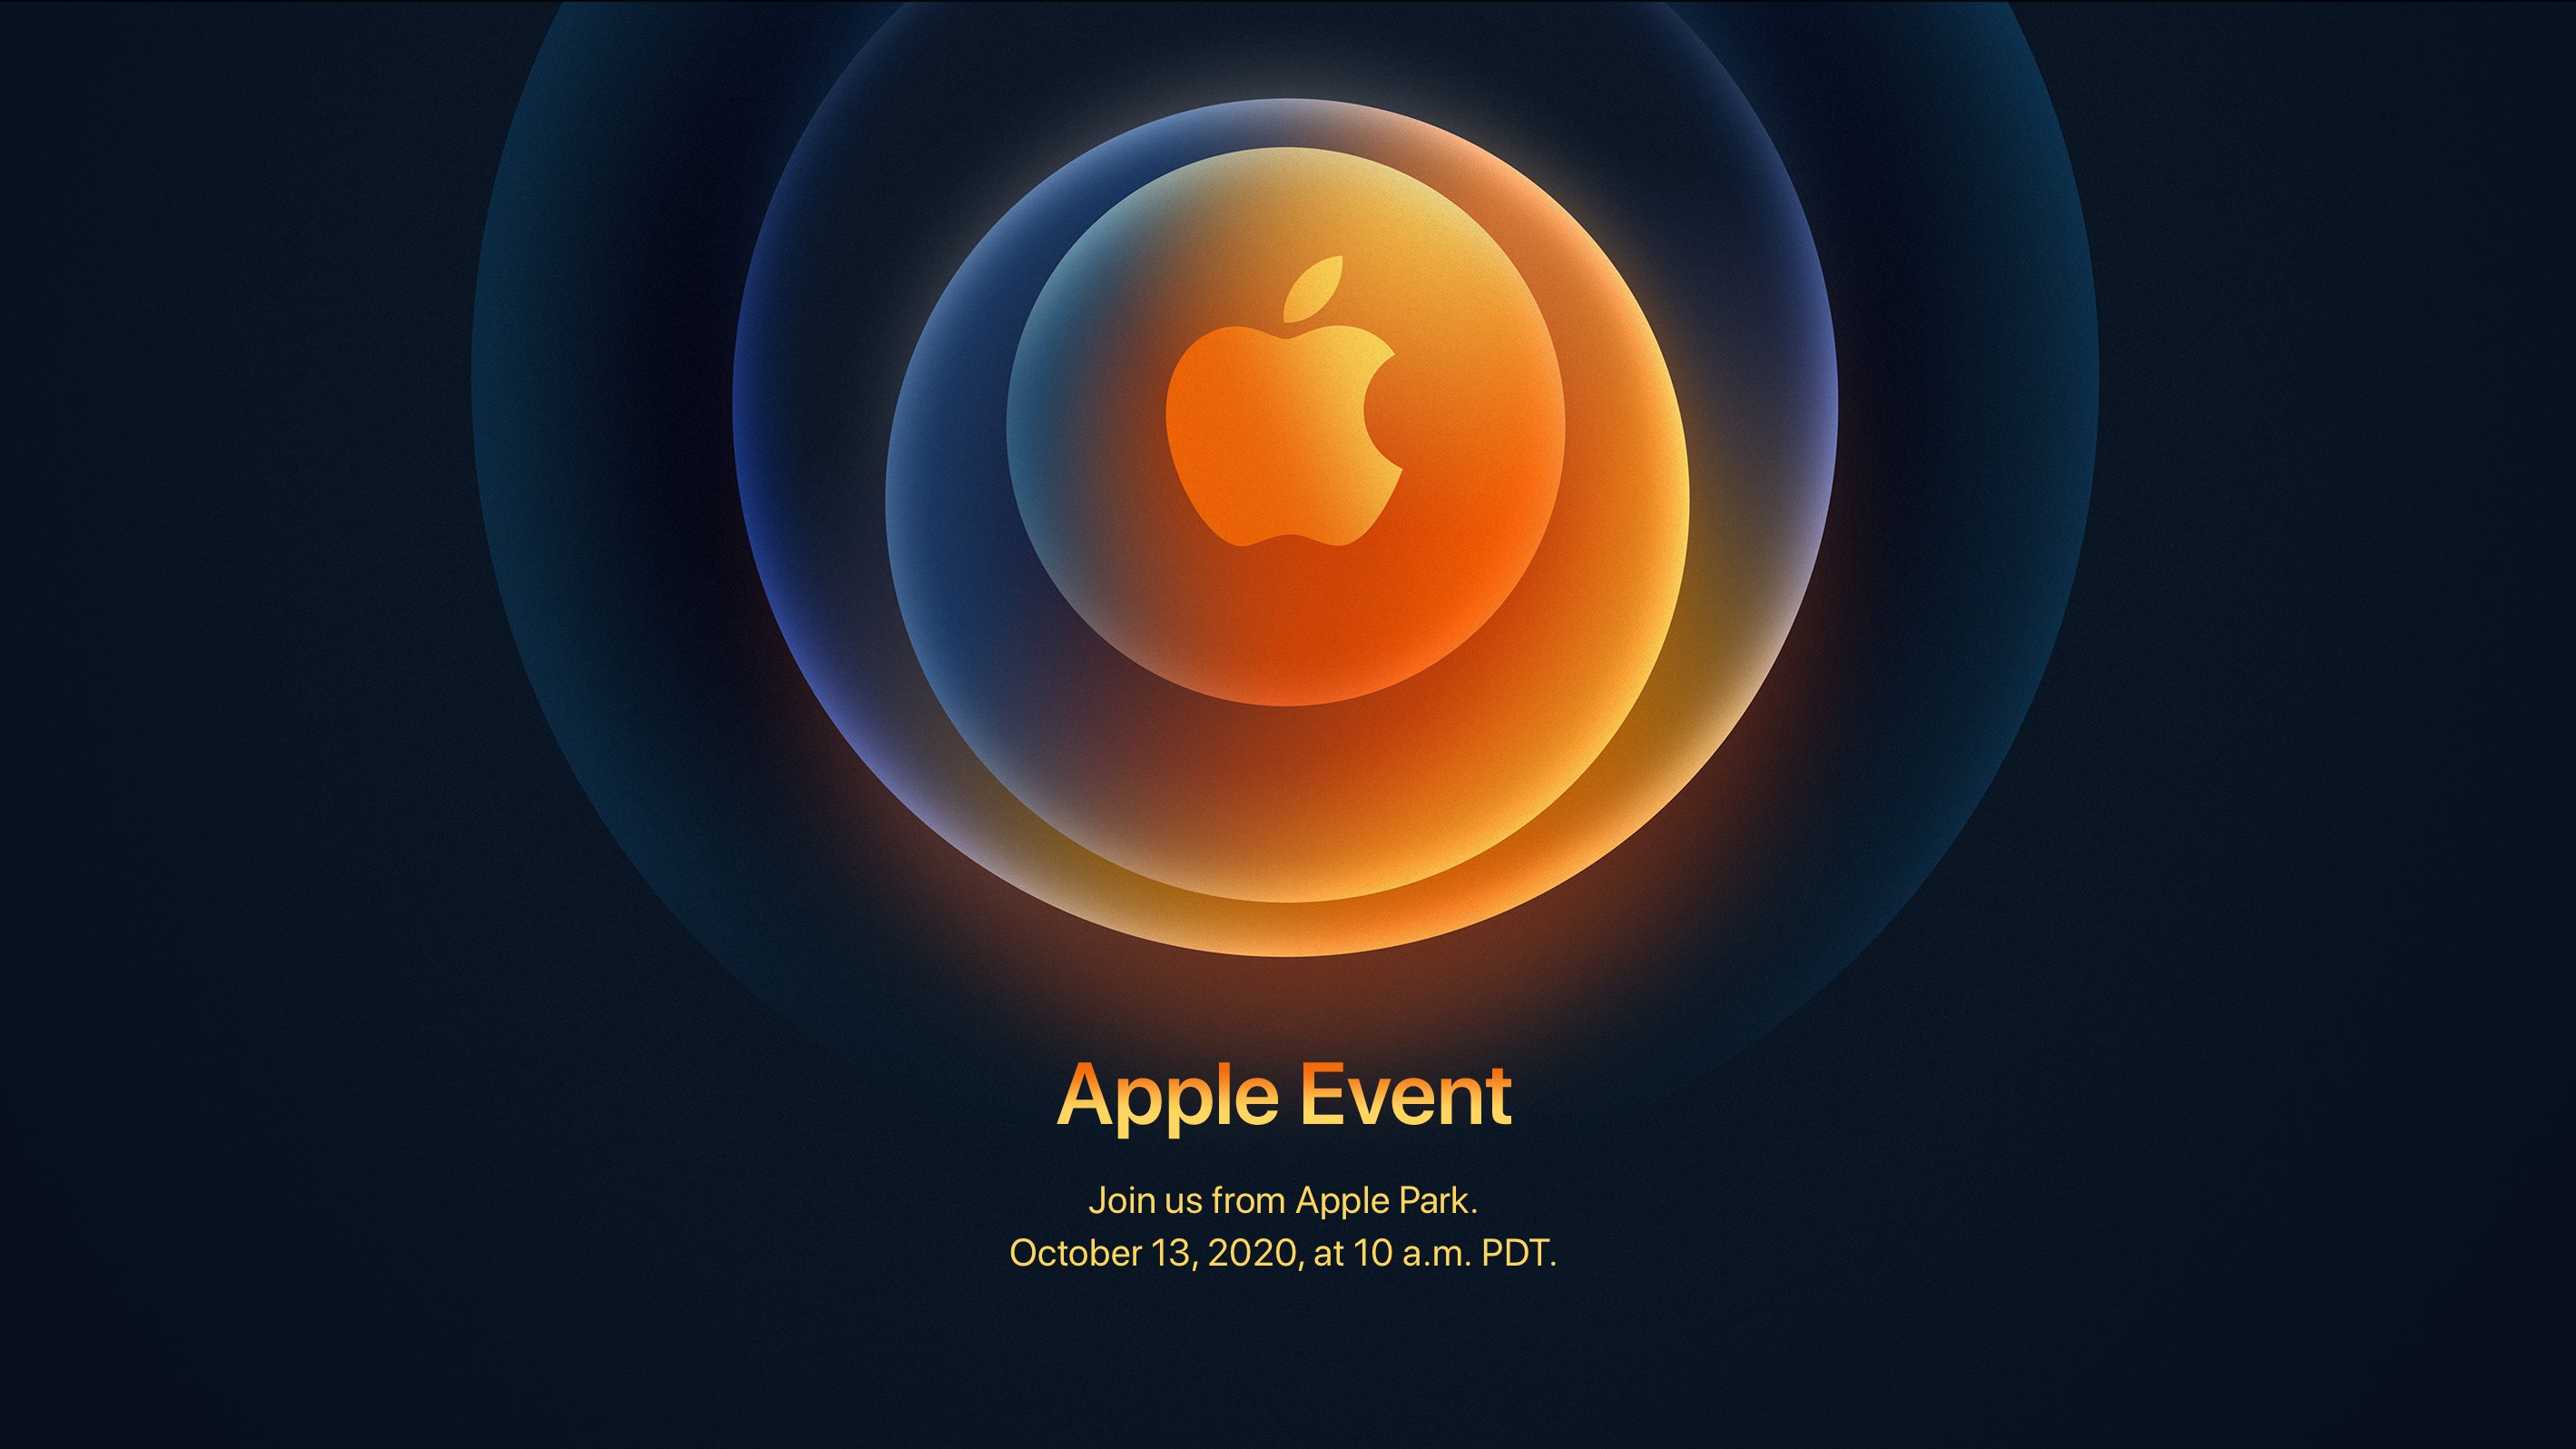 All new products at a glance what we expect from the Apple keynote today